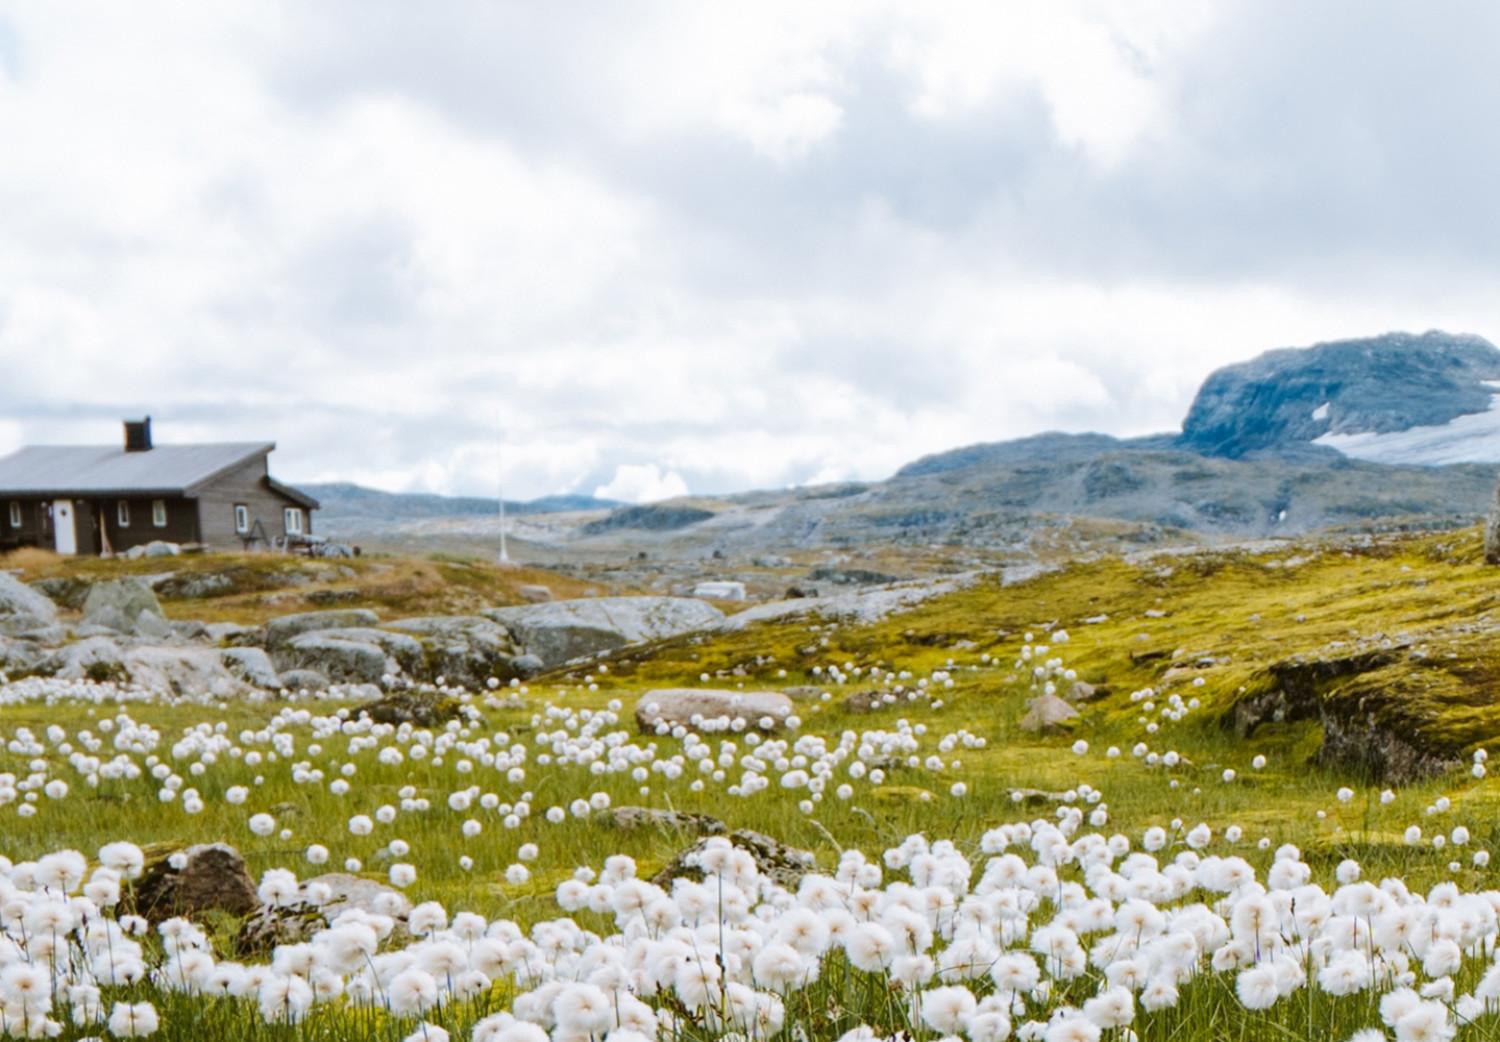 Poster Meadow in the North - landscape of a meadow with white flowers against a mountain backdrop